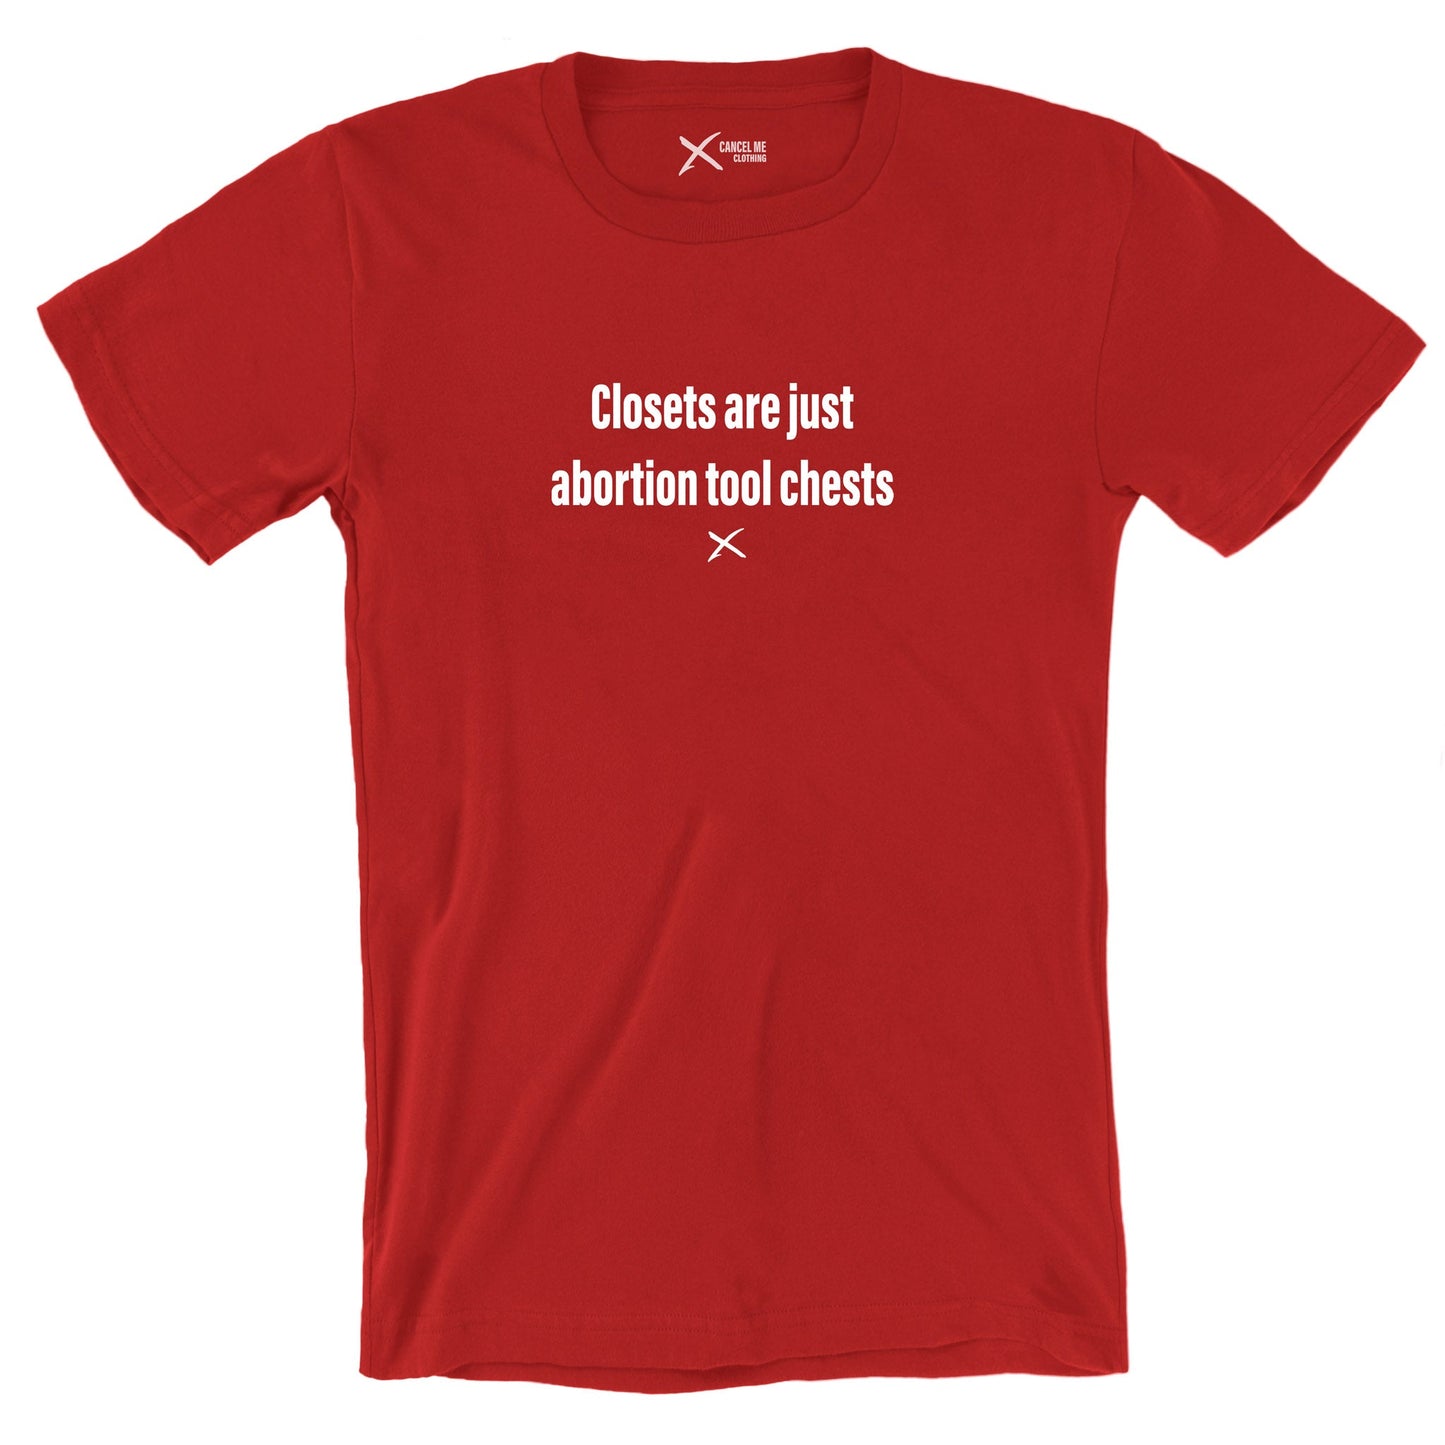 Closets are just abortion tool chests - Shirt